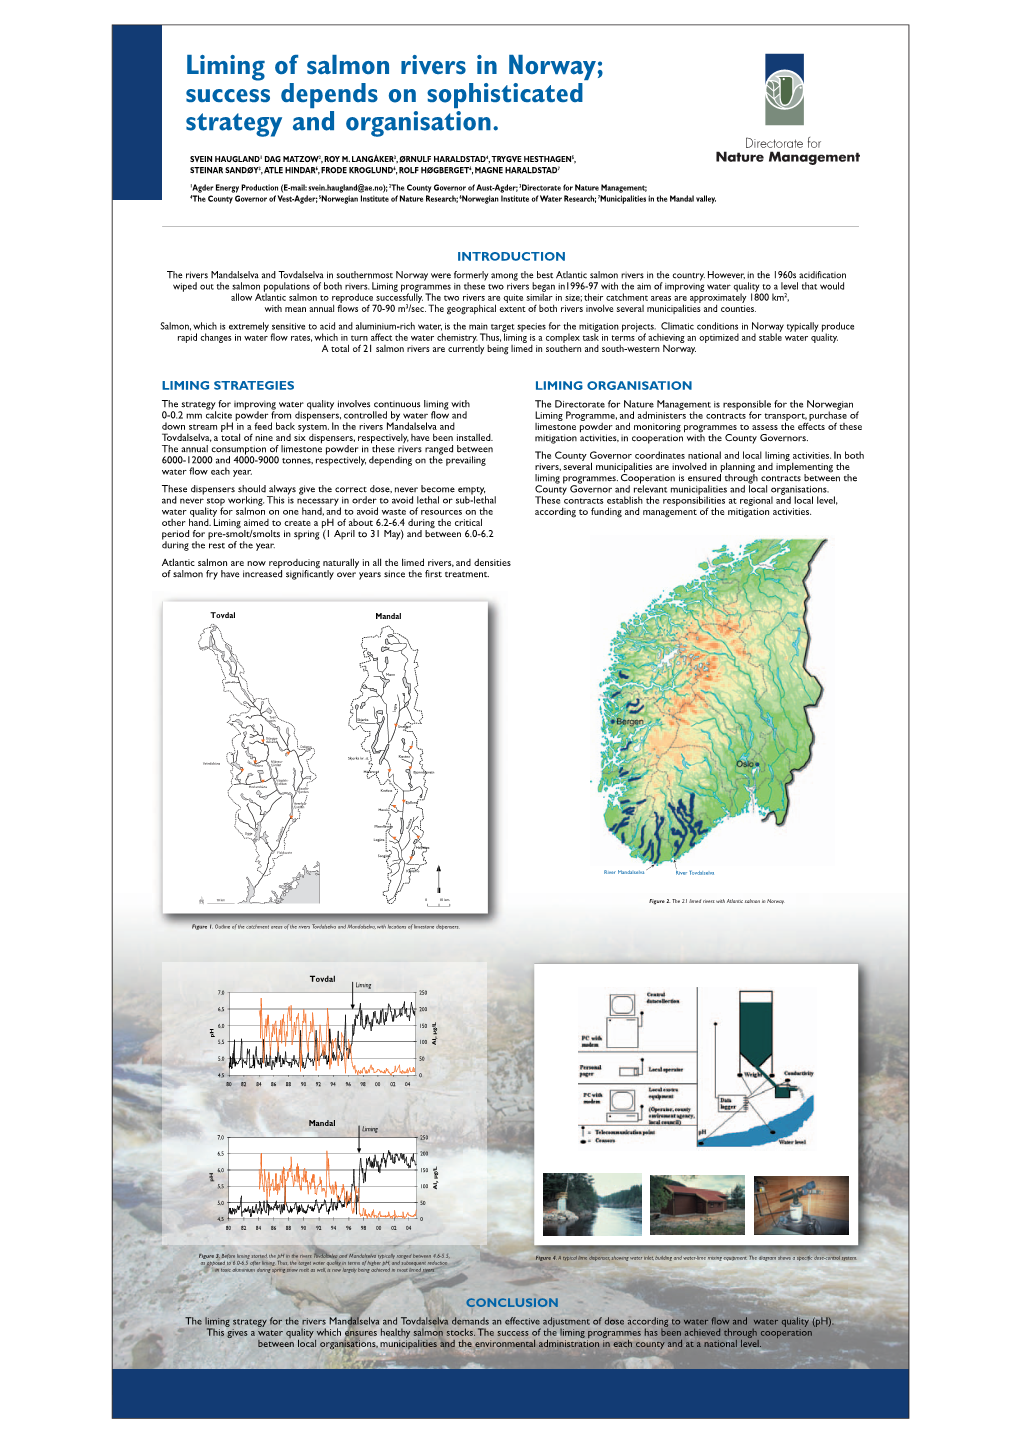 Liming of Salmon Rivers in Norway; Success Depends on Sophisticated Strategy and Organisation